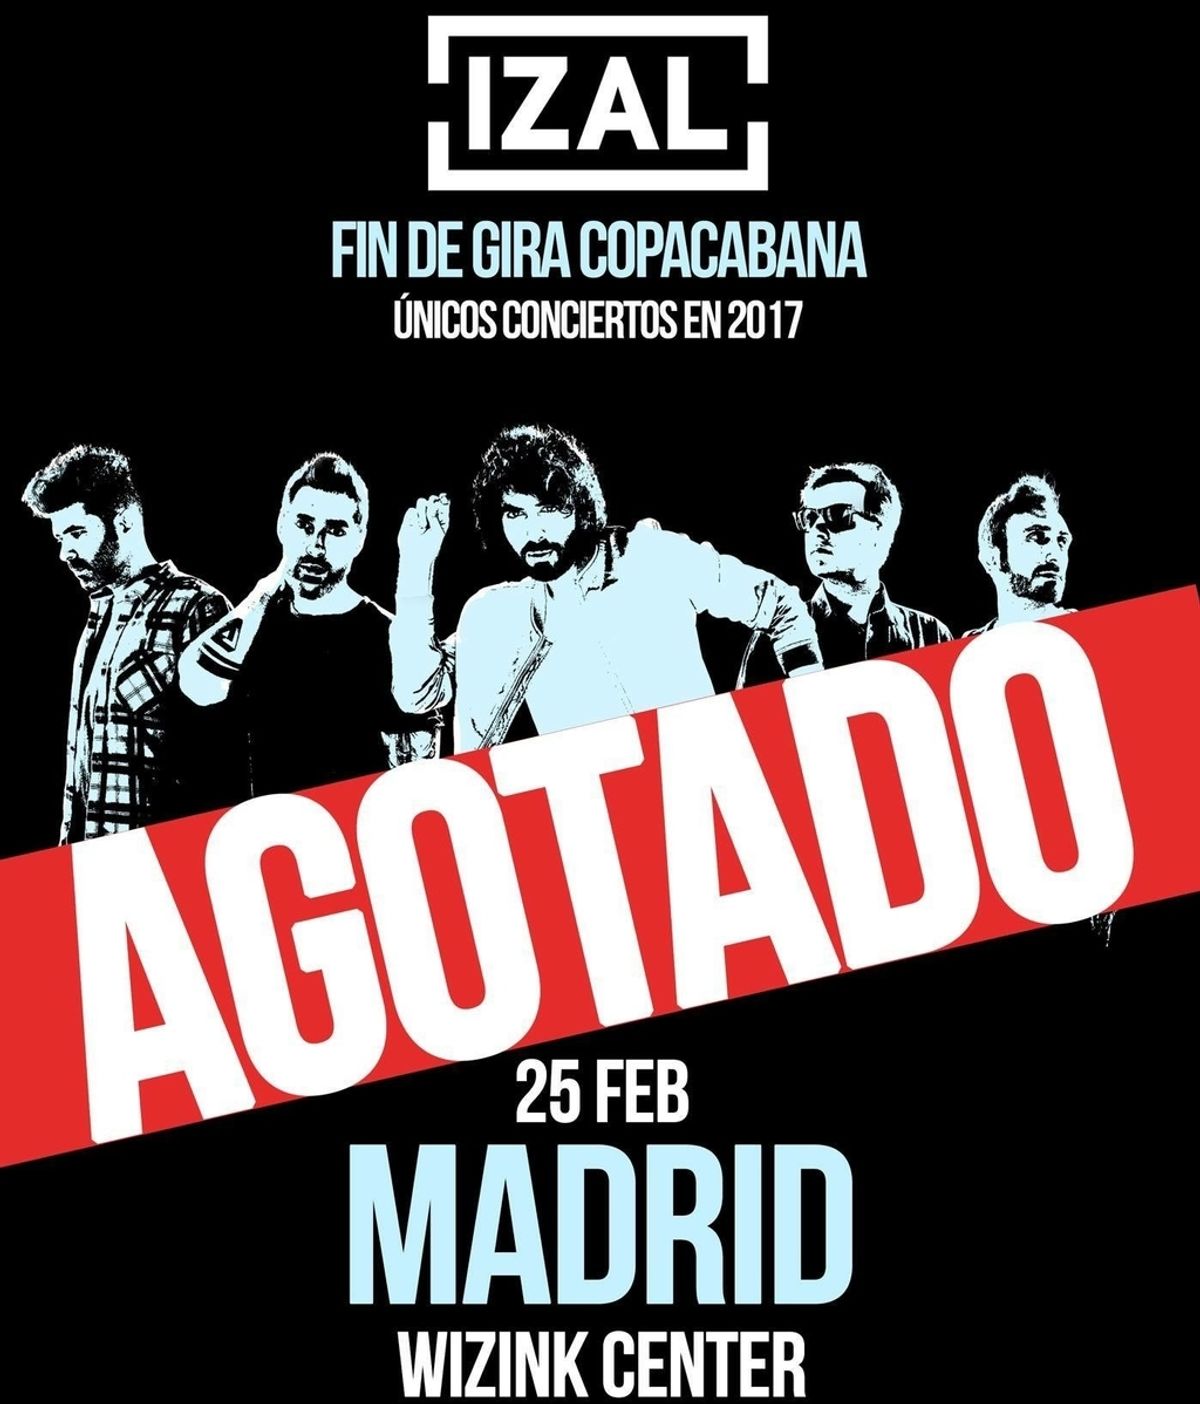 Cartel IZAL SOLD OUT Madrid